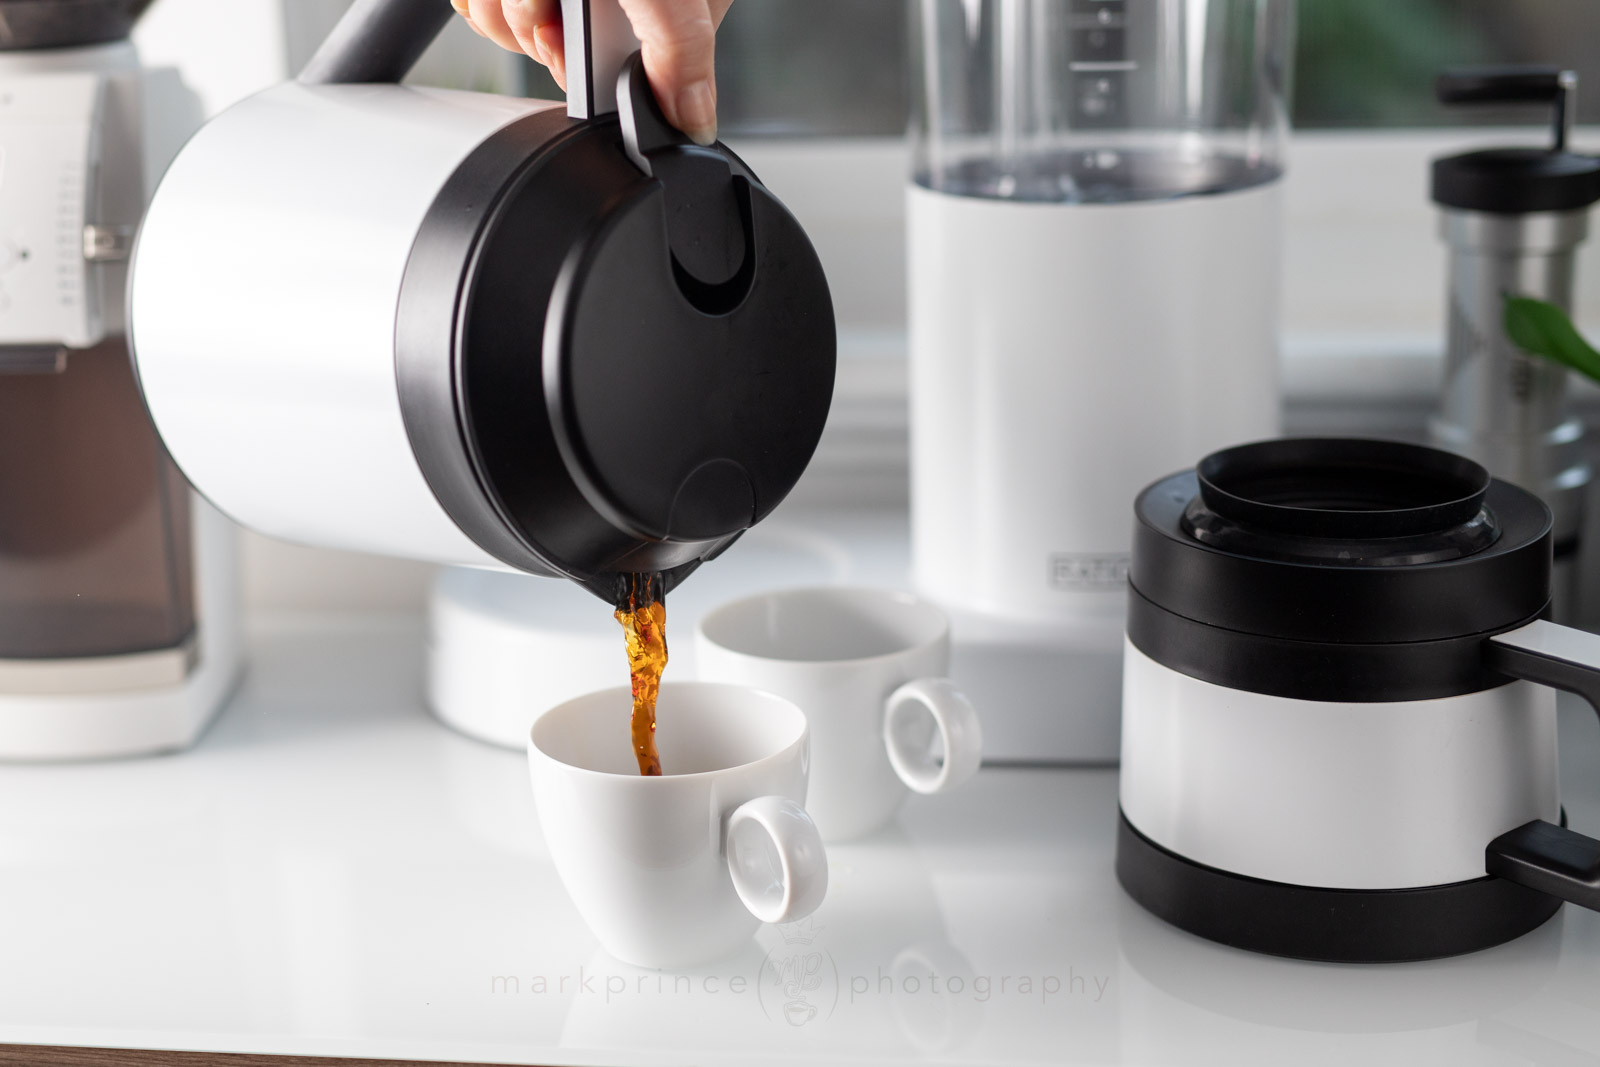 Ratio Six Coffee Brewer — Hohl - Cafe, Restaurant